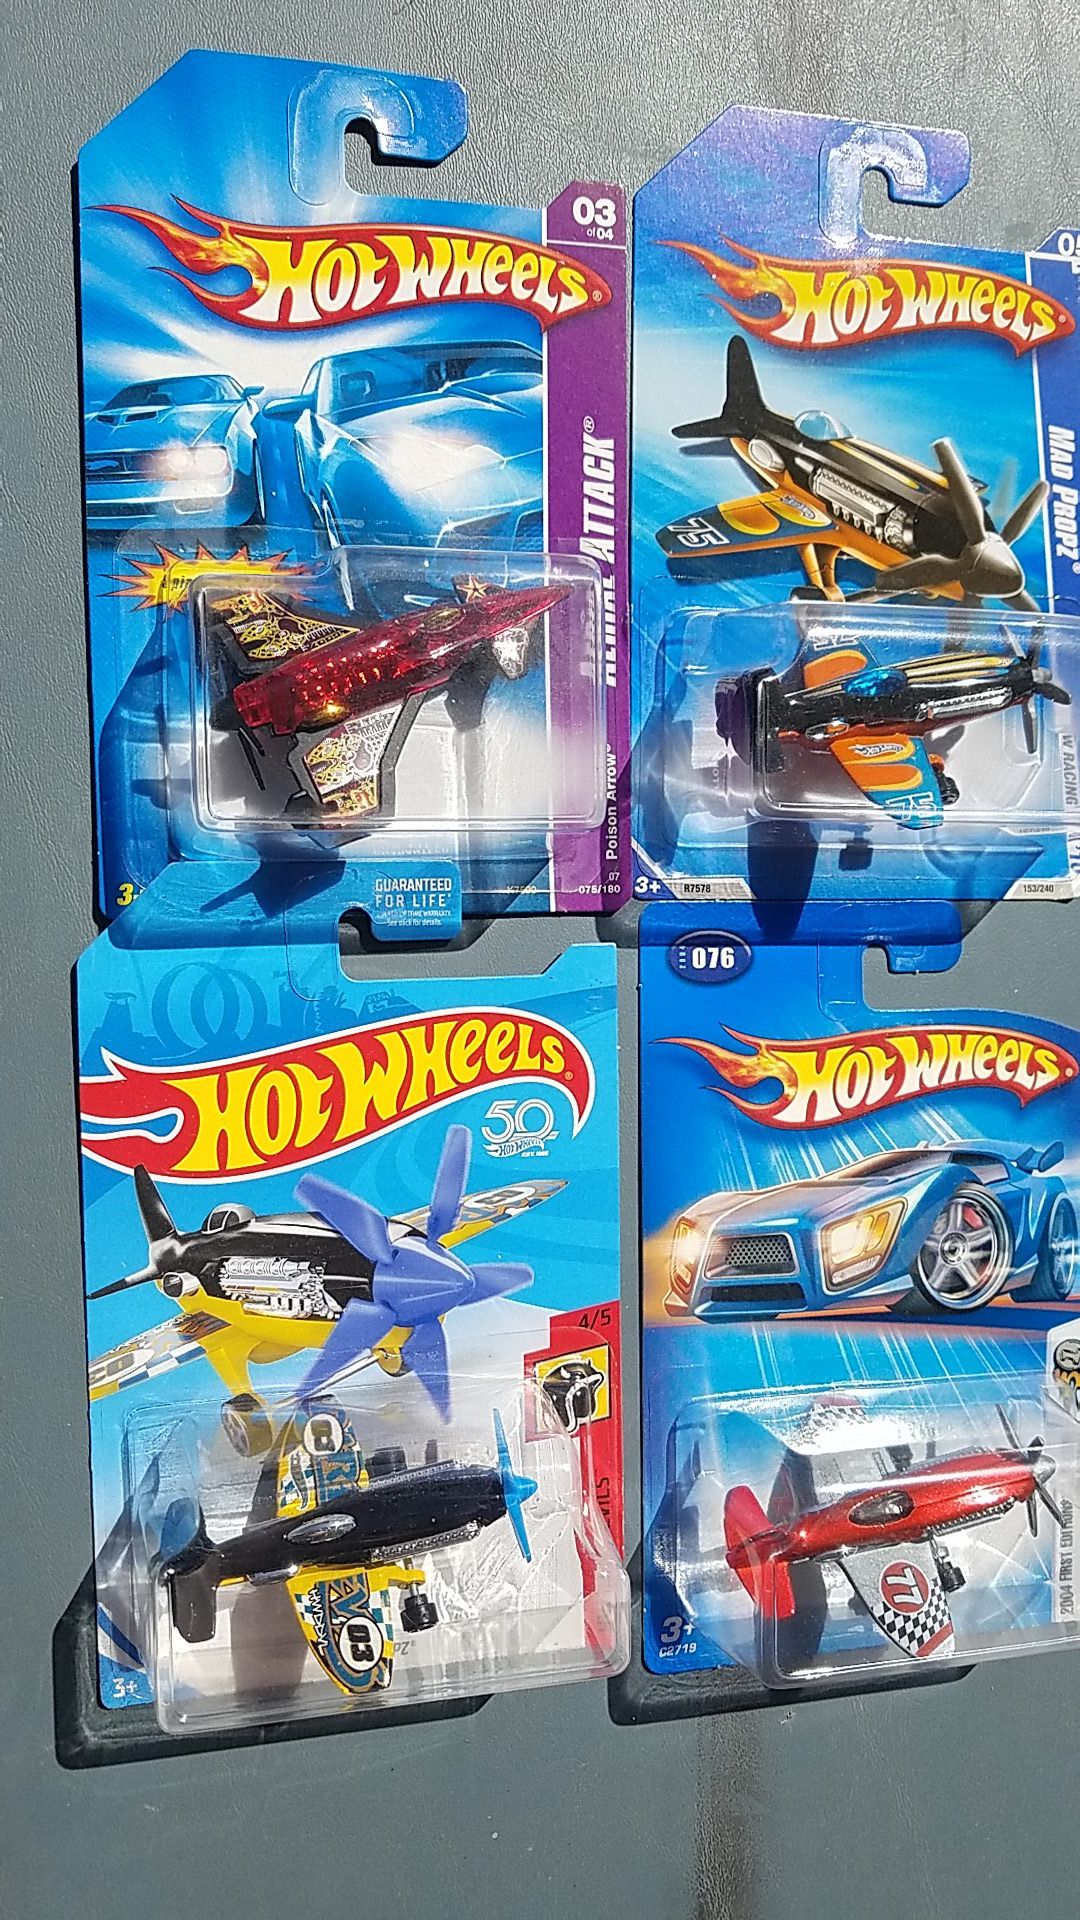 Hot Wheels set of four mad props planes